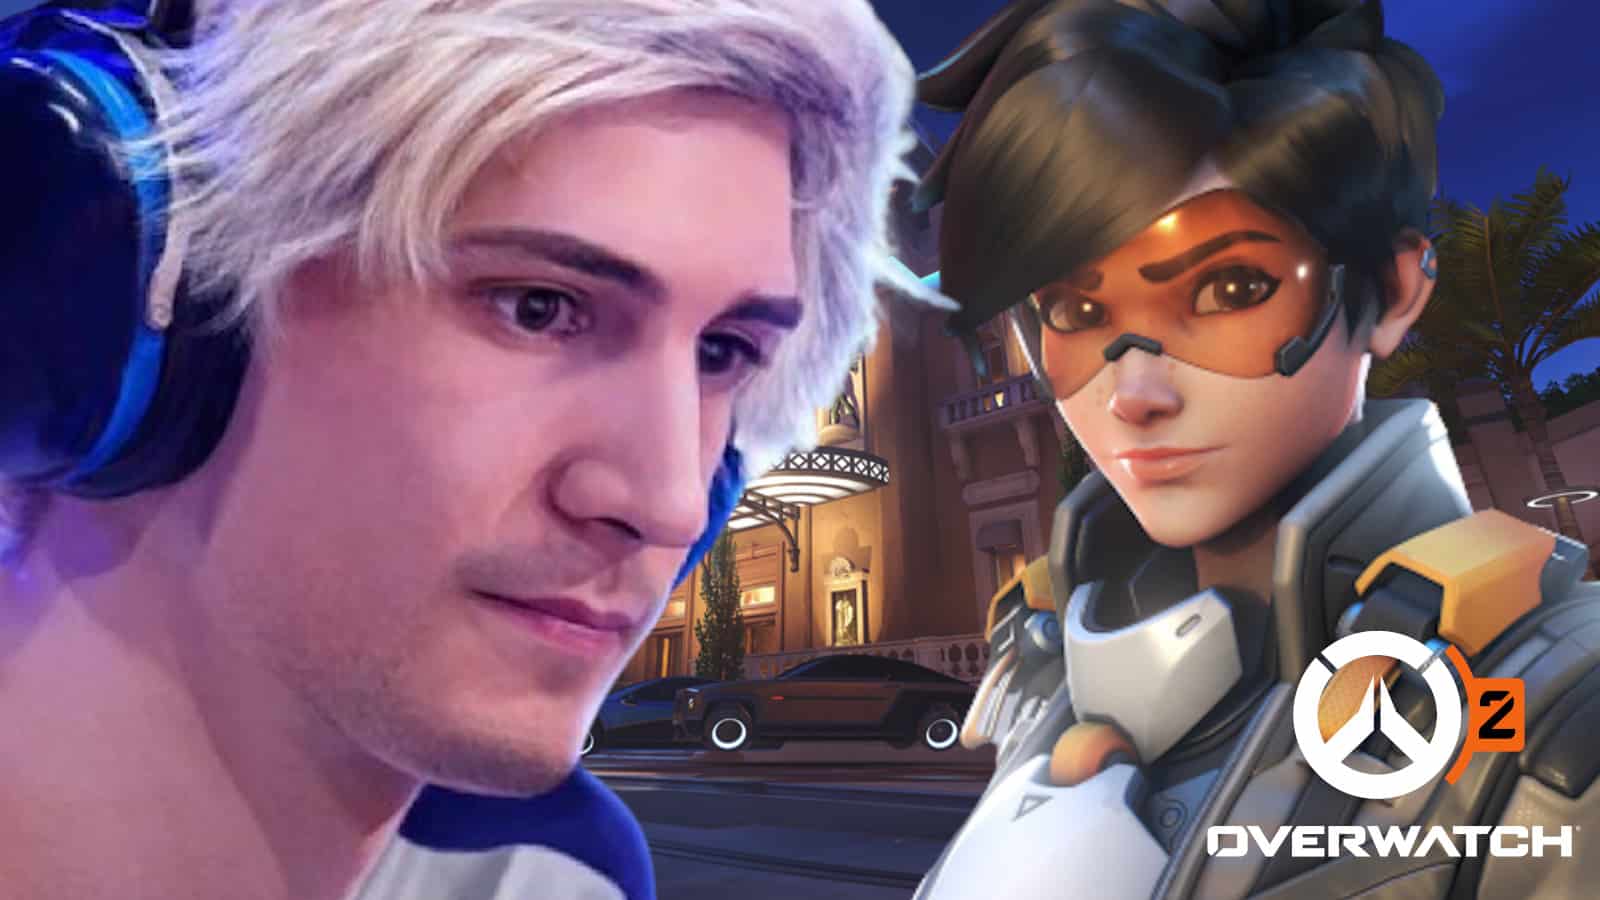 xQc says Overwatch 2 will be worth buying